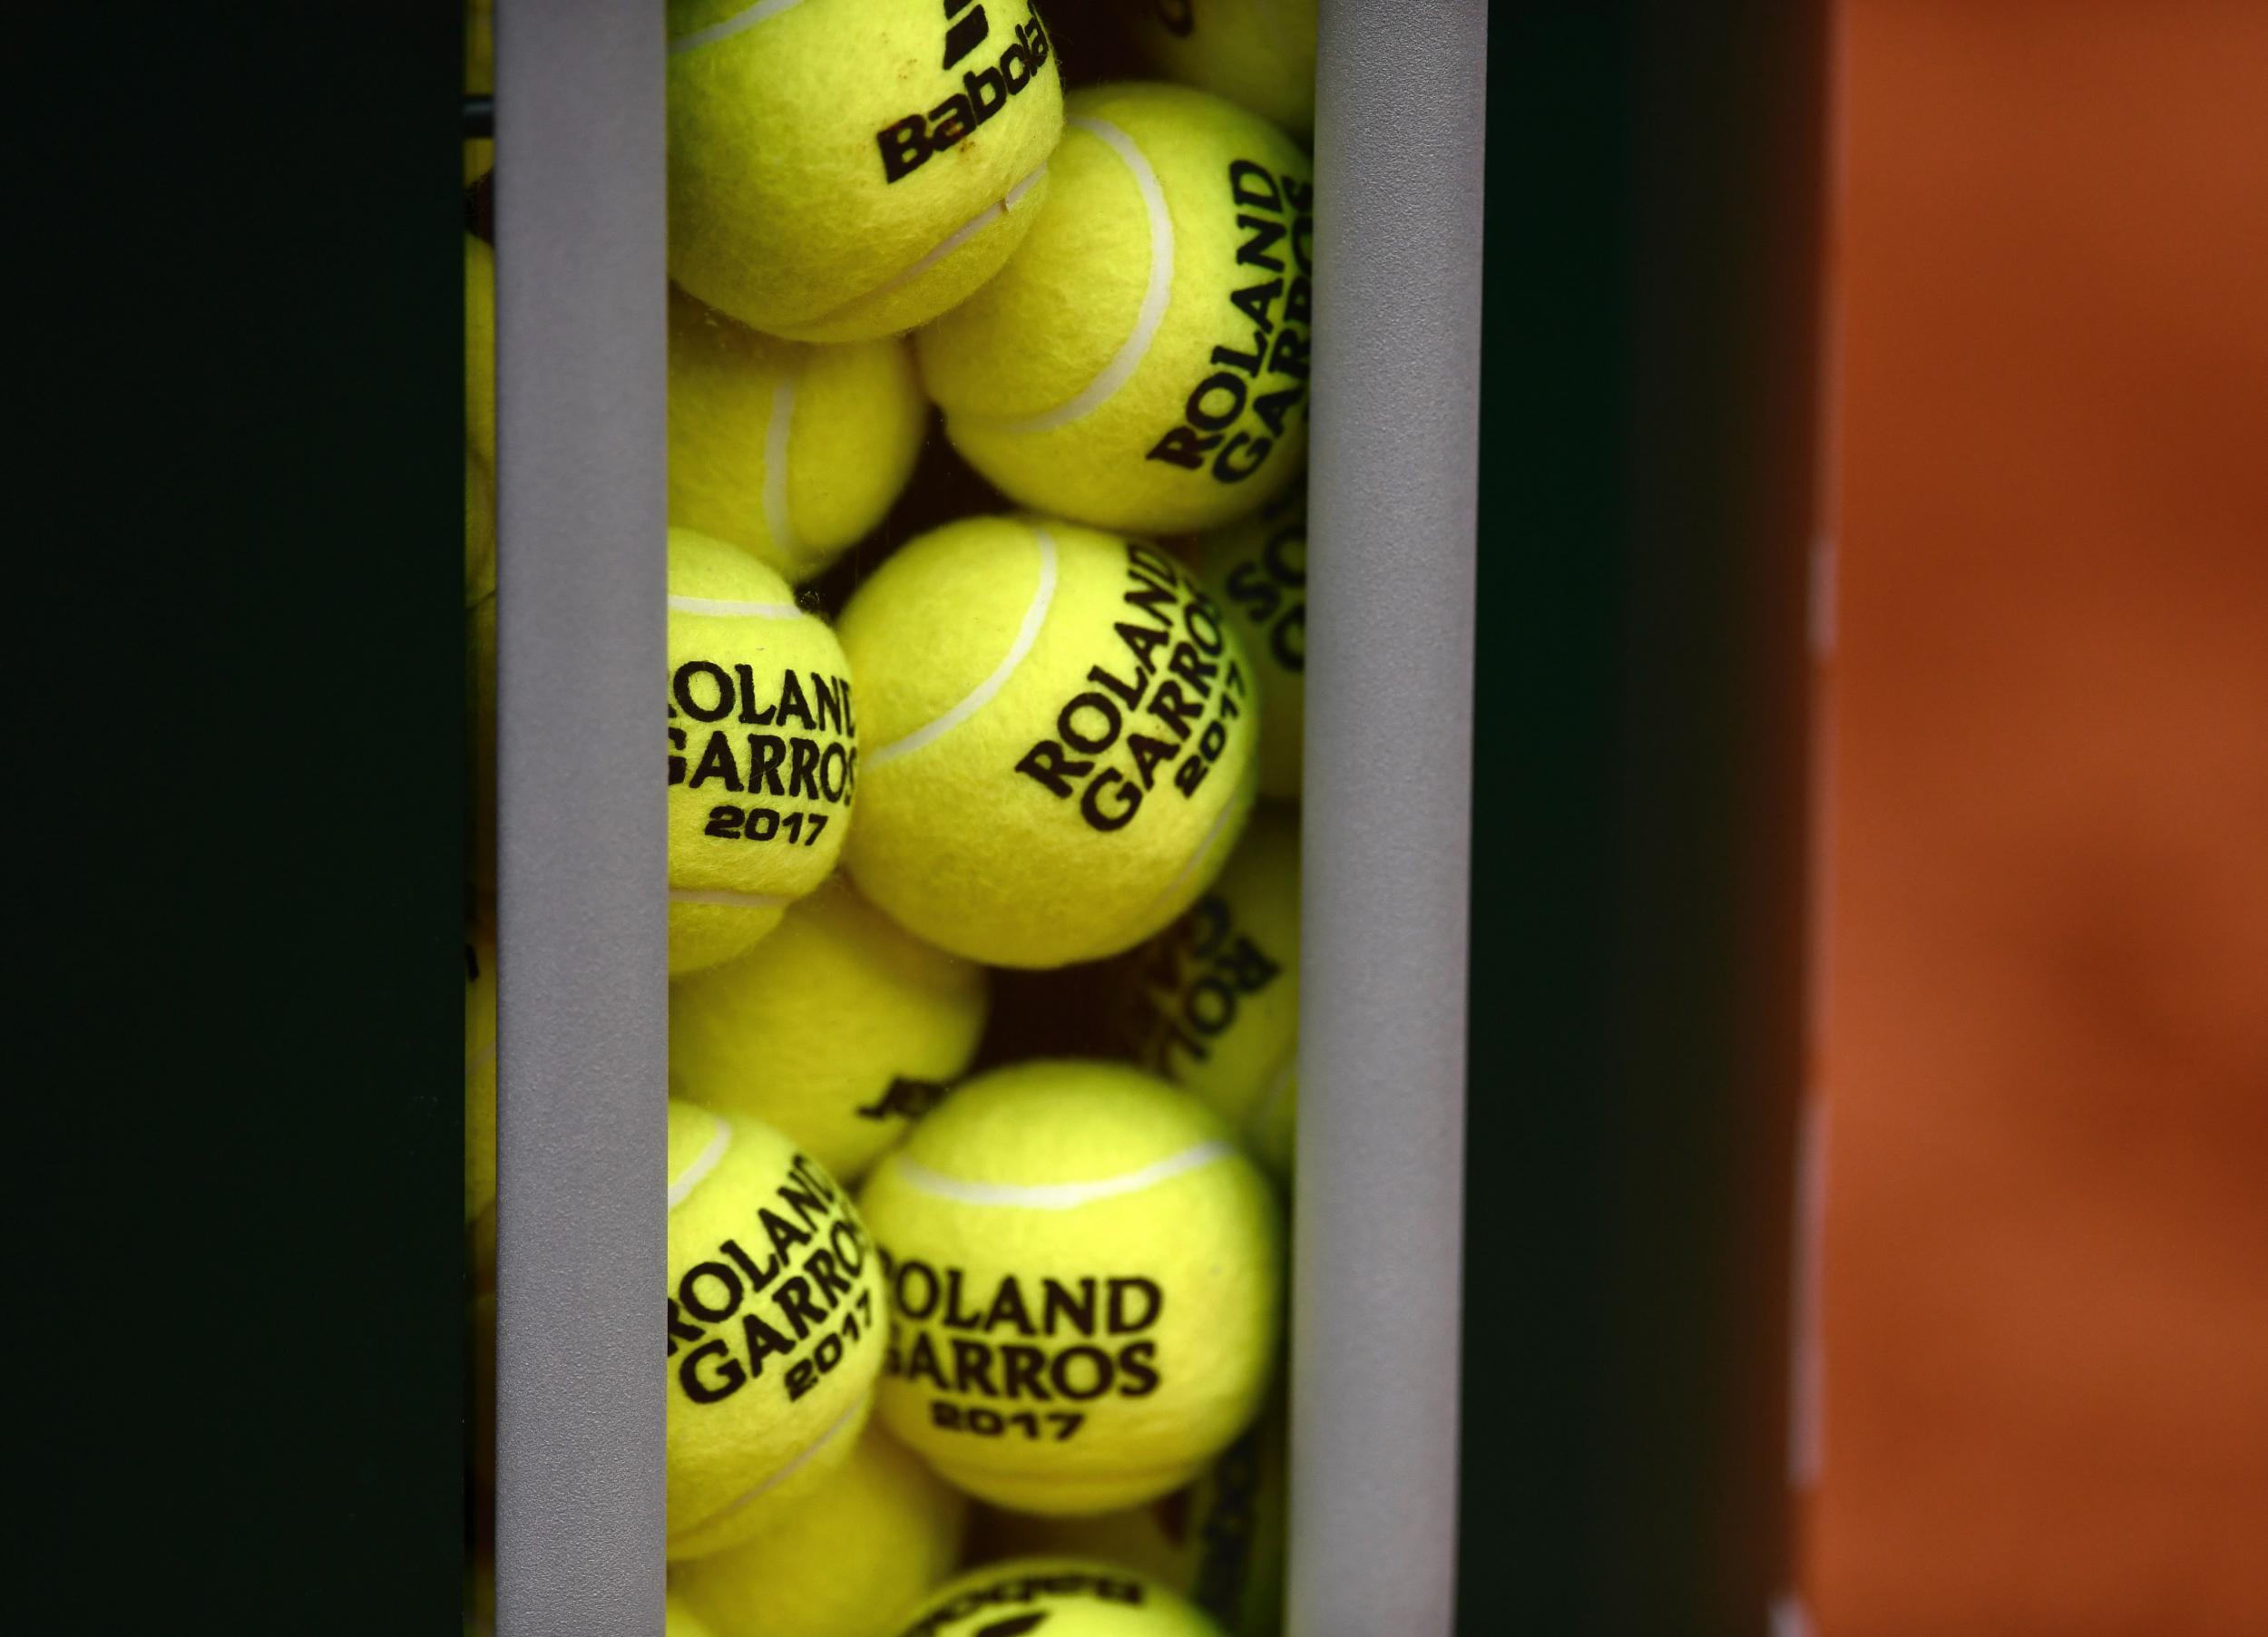 The second round matches have now been completed at this year's French Open